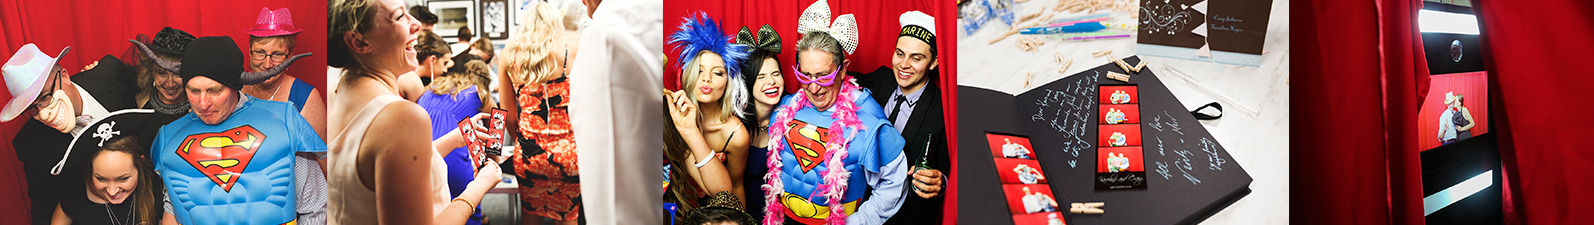 Forget Awkward Staged Photos with a Photographer, Your Photobooth will Capture Real Moments